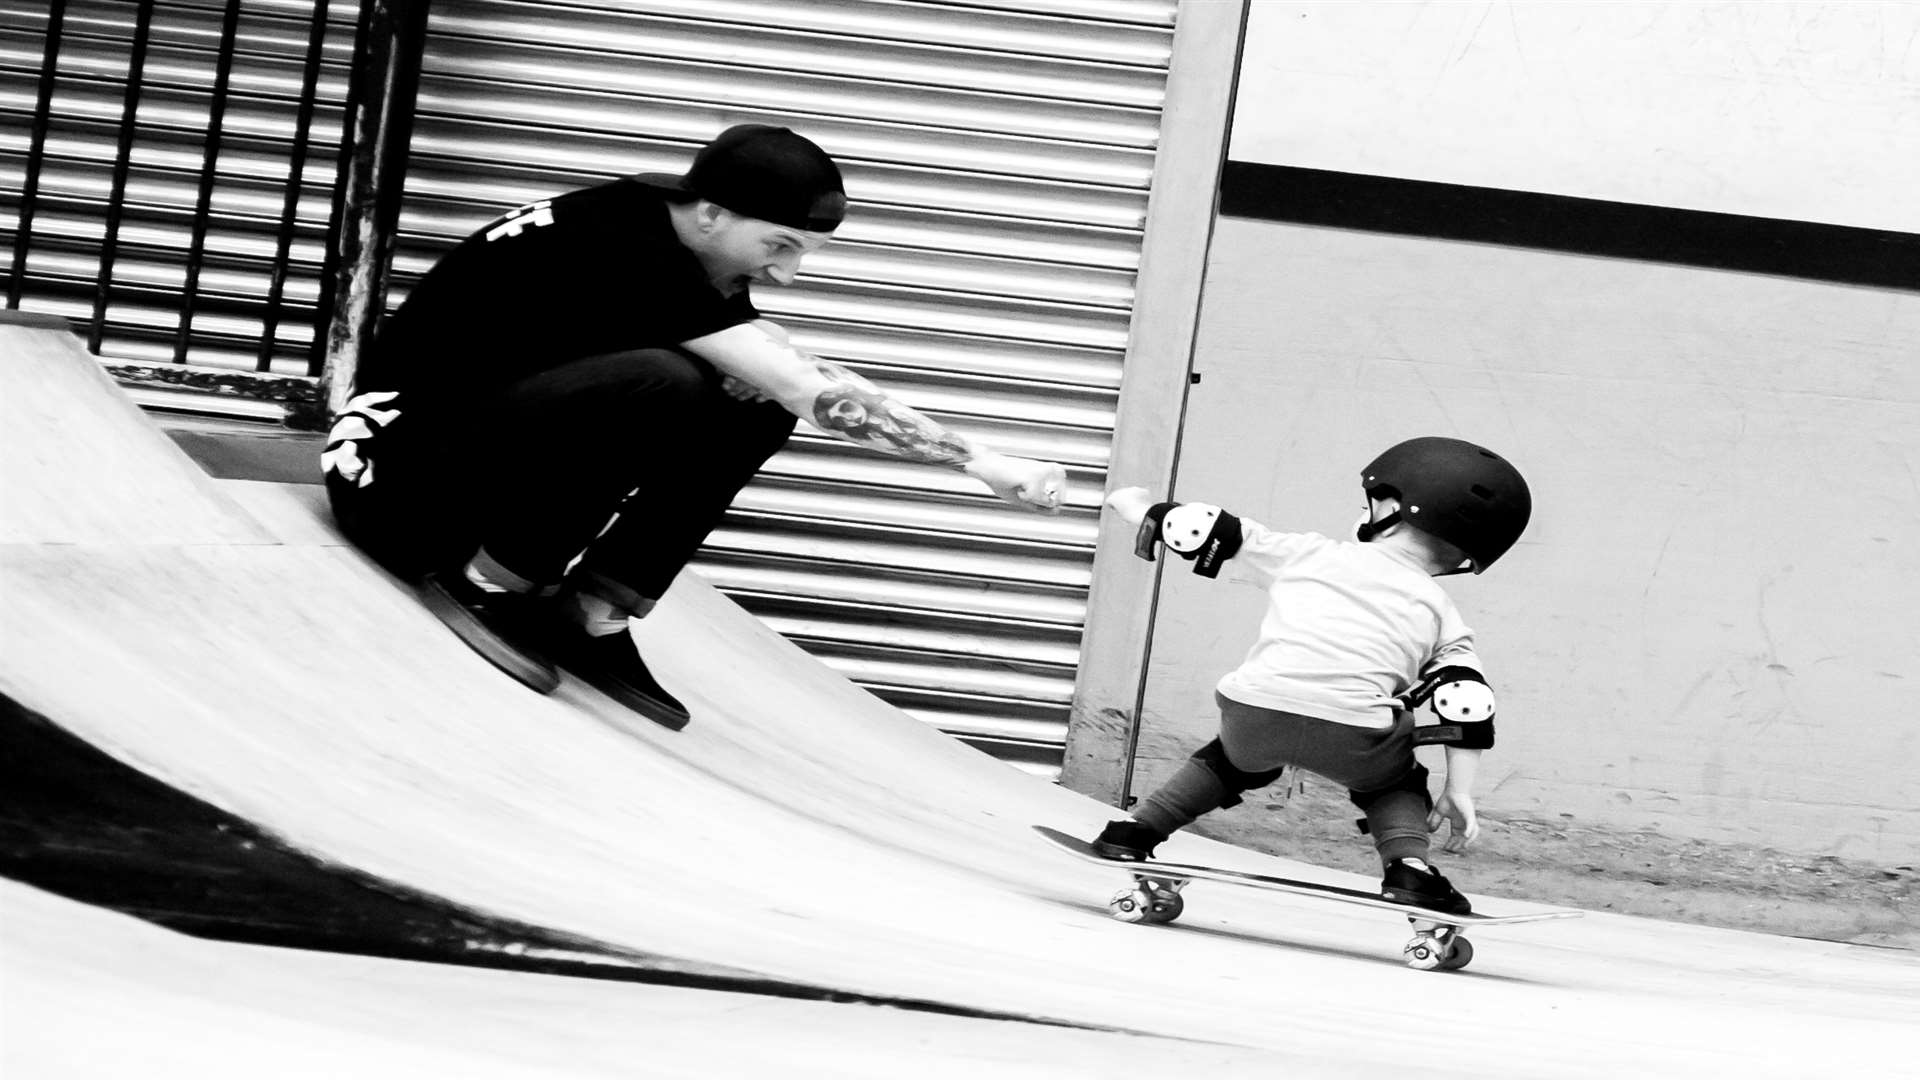 Sam and a young skateboarder